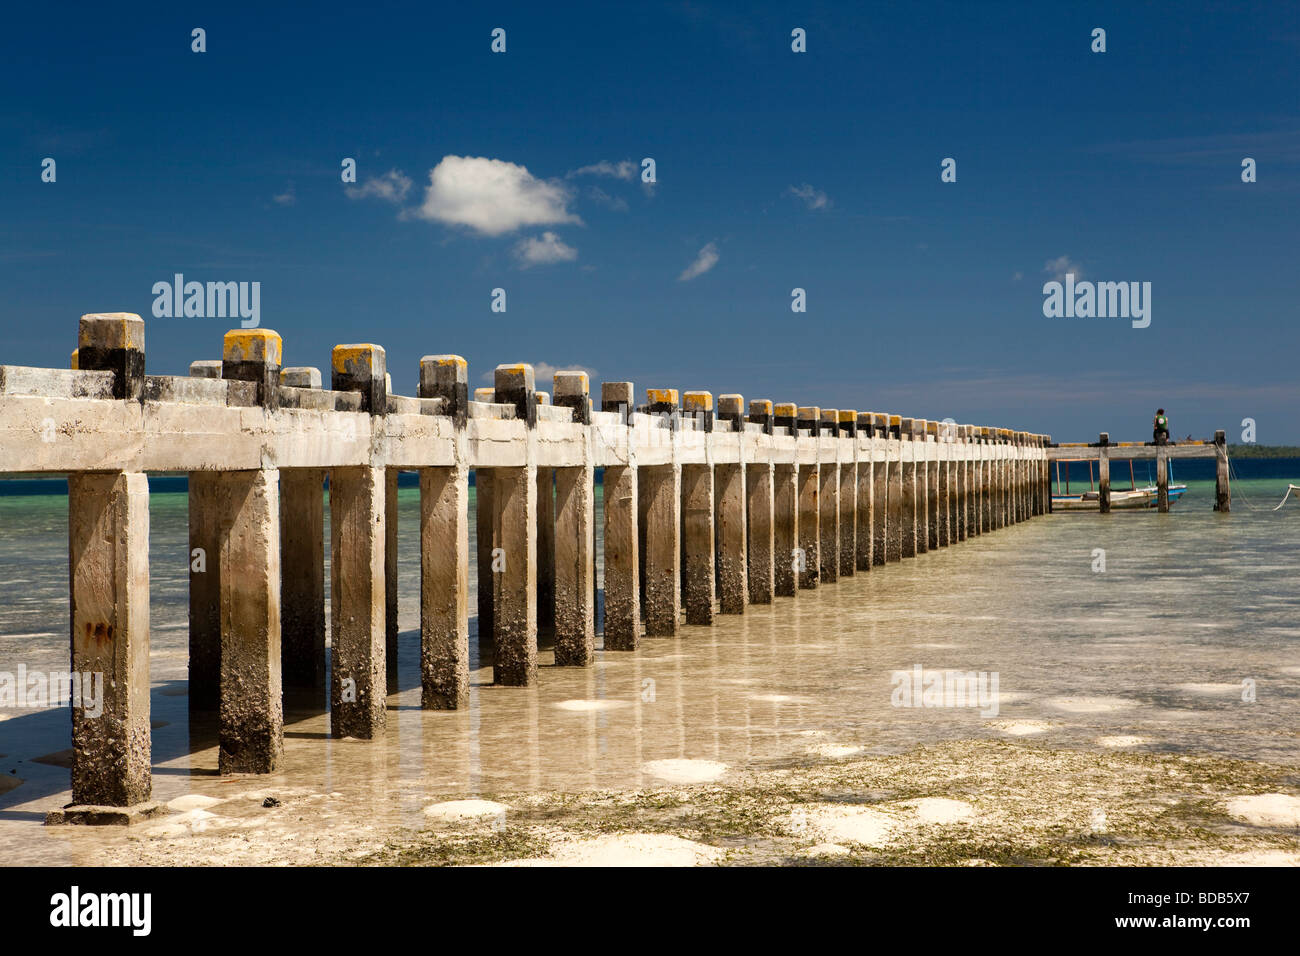 Indonesia Sulawesi Hoga Island Operation Wallacea new government built concrete jetty Stock Photo